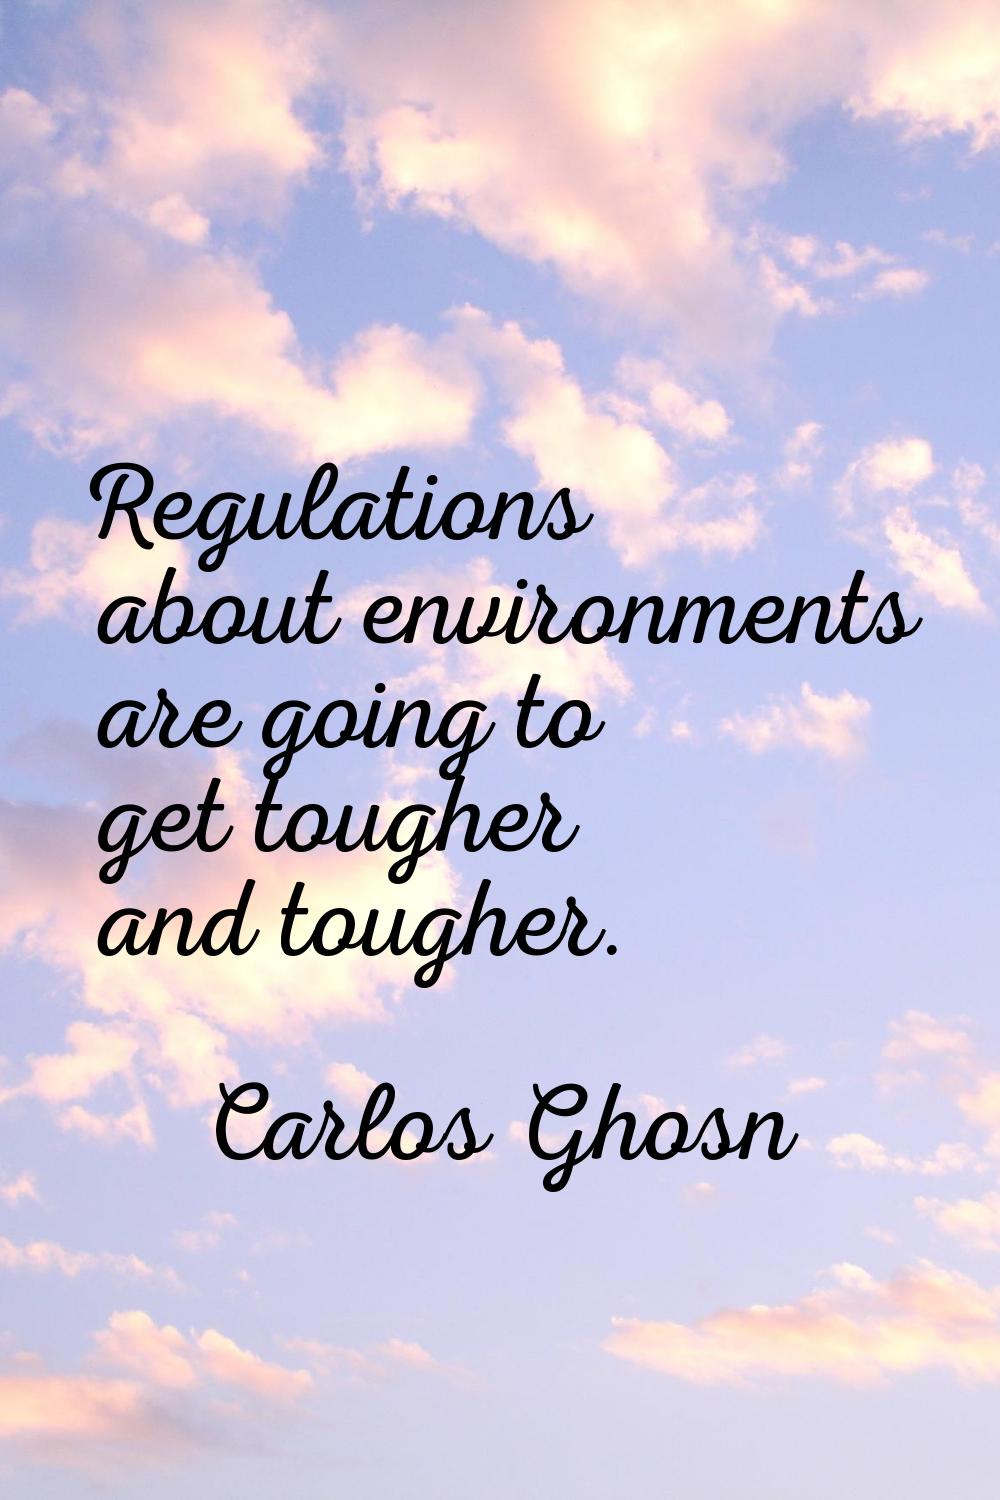 Regulations about environments are going to get tougher and tougher.